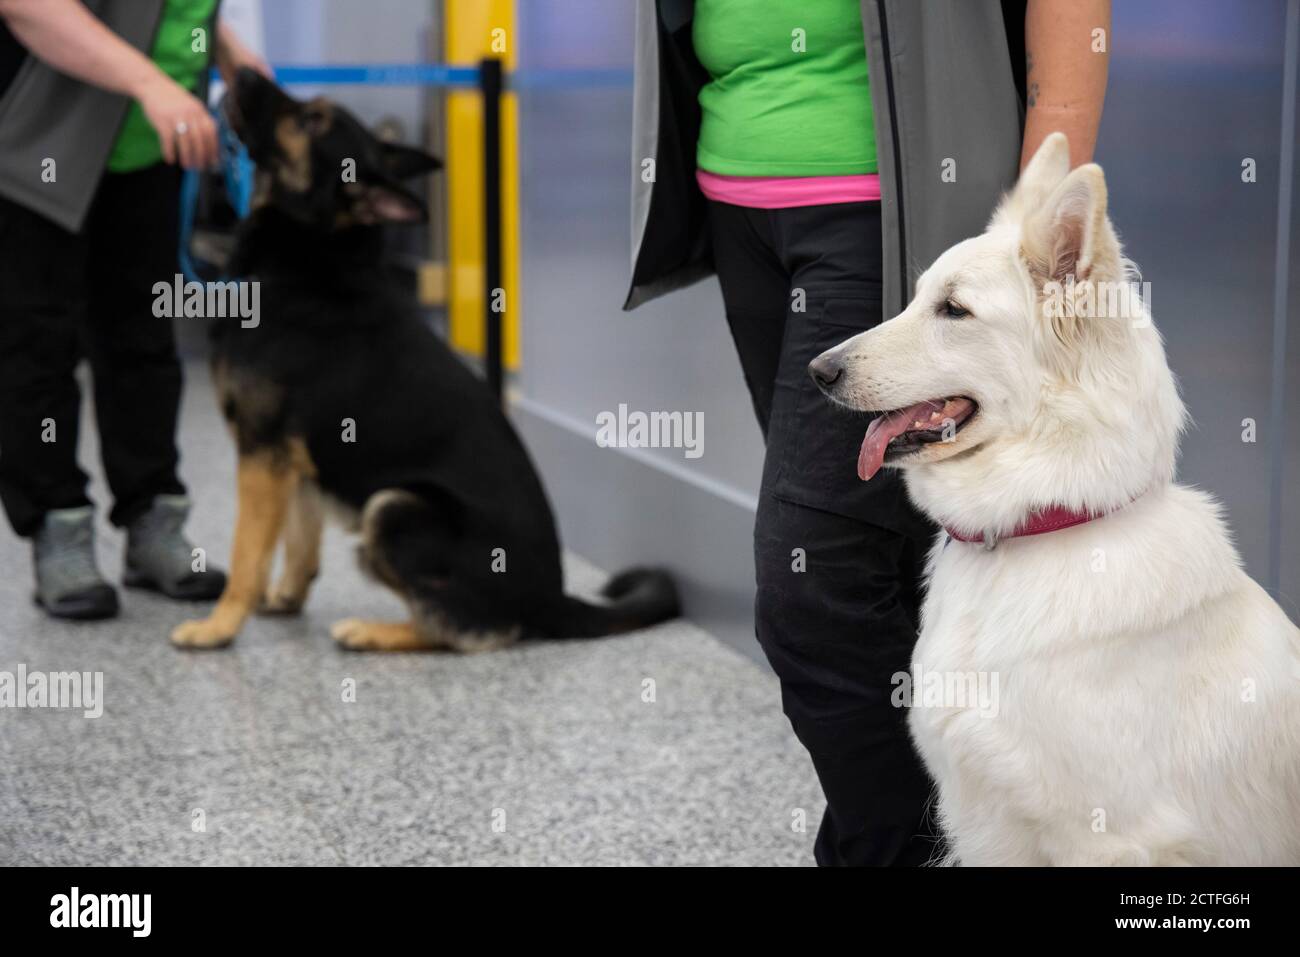 Helsinki. 22nd Sep, 2020. Photo taken on Sept. 22, 2020 shows COVID-19 sniffer dogs at a press conference held at Helsinki Vantaa International Airport in Finland. Four specially trained dogs demonstrated their ability to sniff COVID-19 in people even before showing symptoms during a press conference held at Helsinki Vantaa International Airport on Tuesday. The pilot project is scheduled to commence later this week. Credit: Matti Matikainen/Xinhua/Alamy Live News Stock Photo